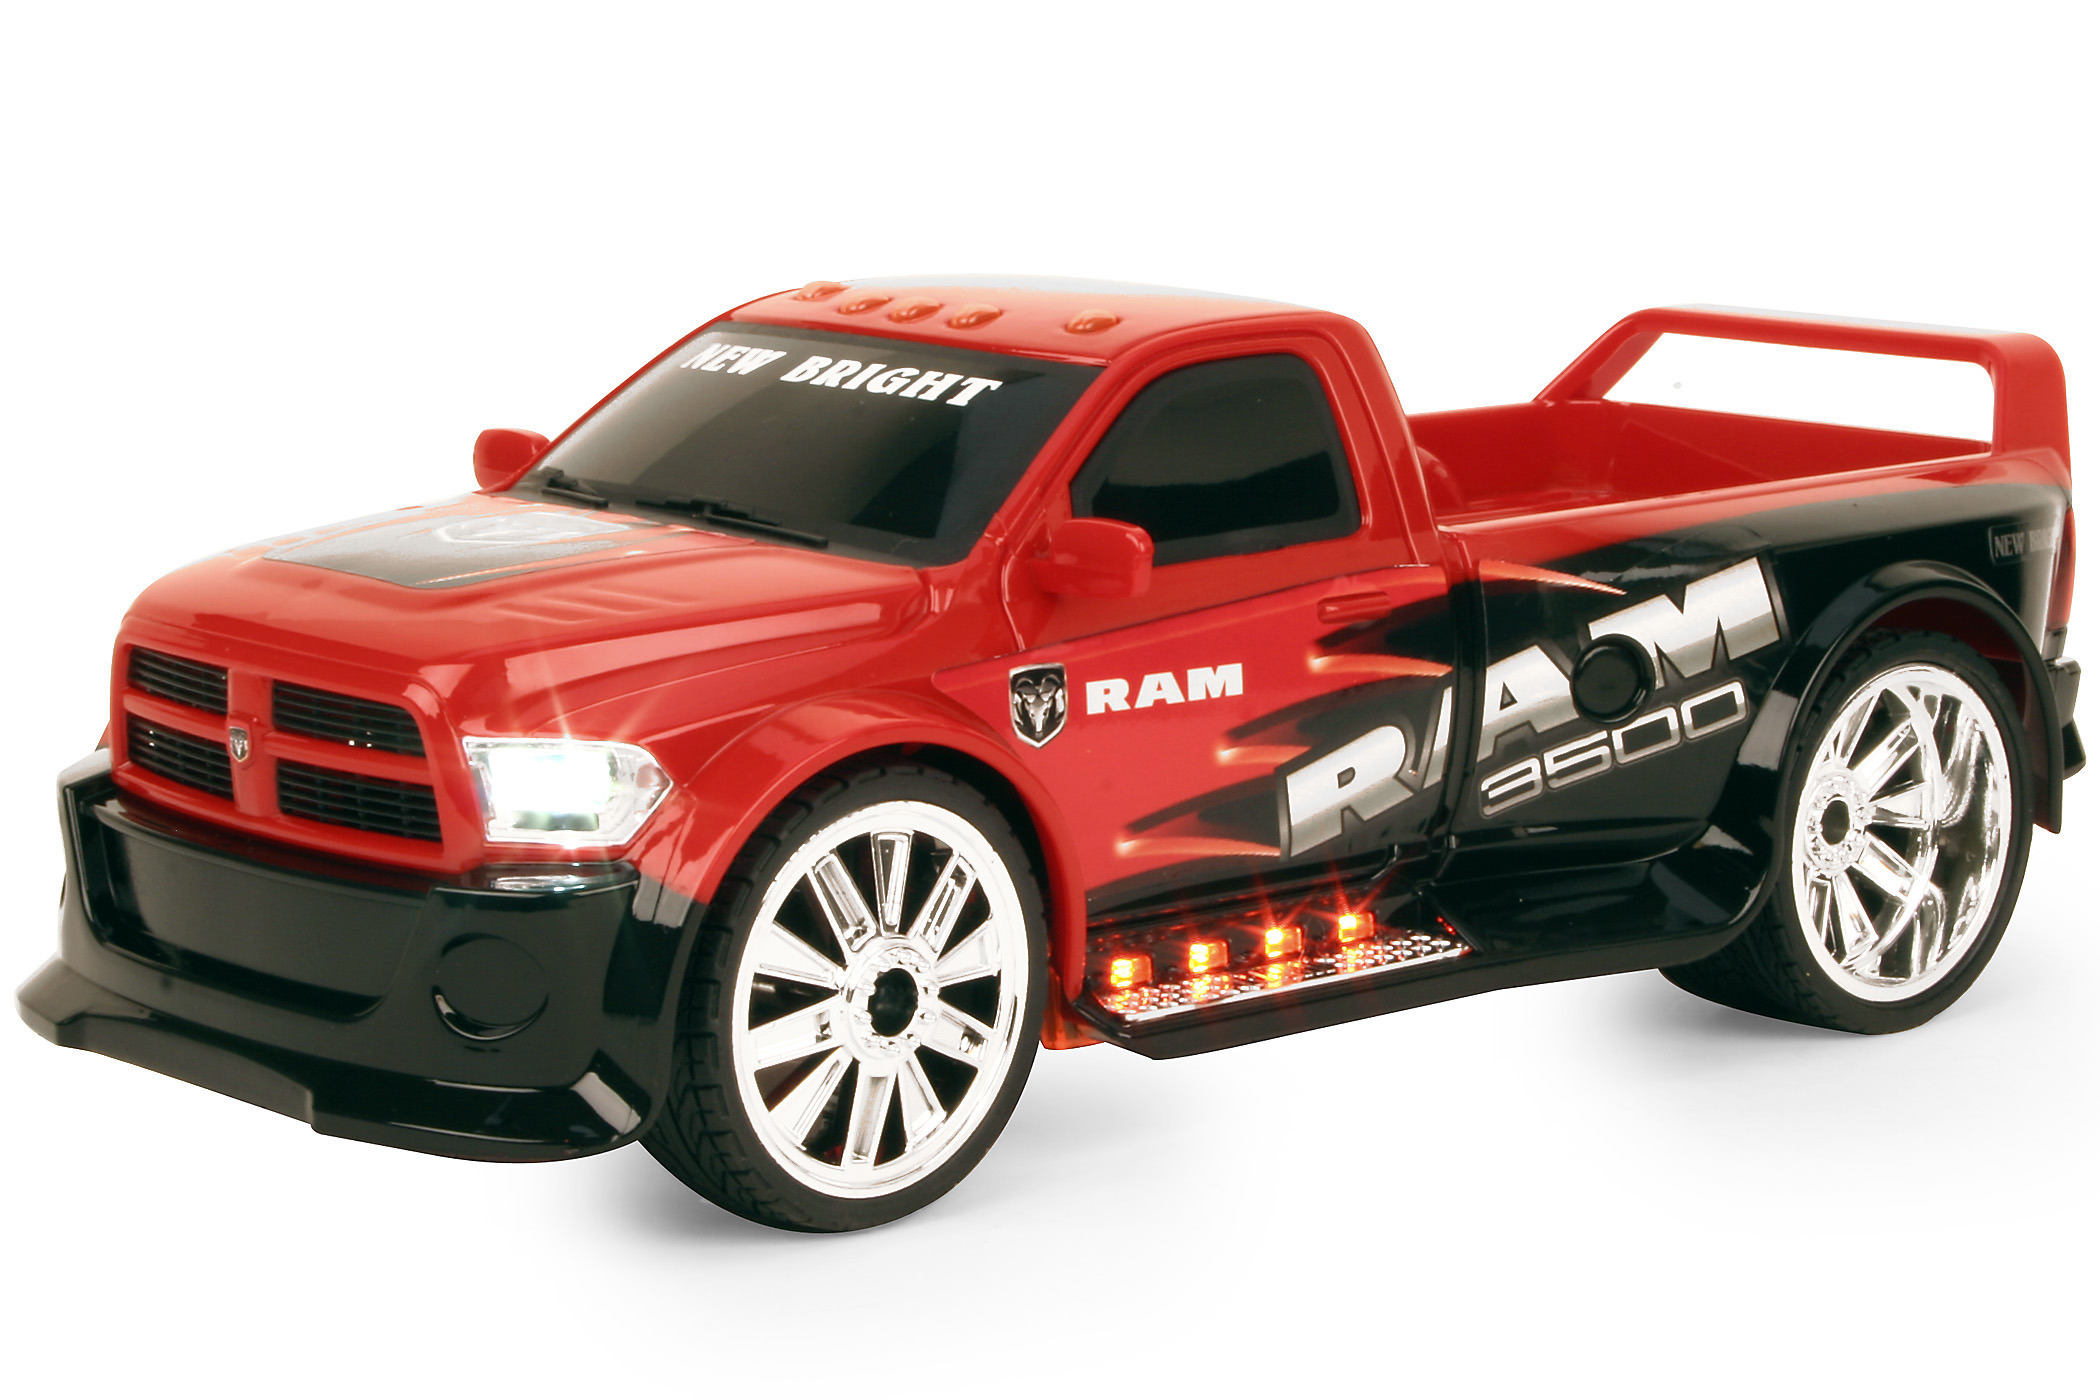 1:16 Scale Dodge Ram with Lights